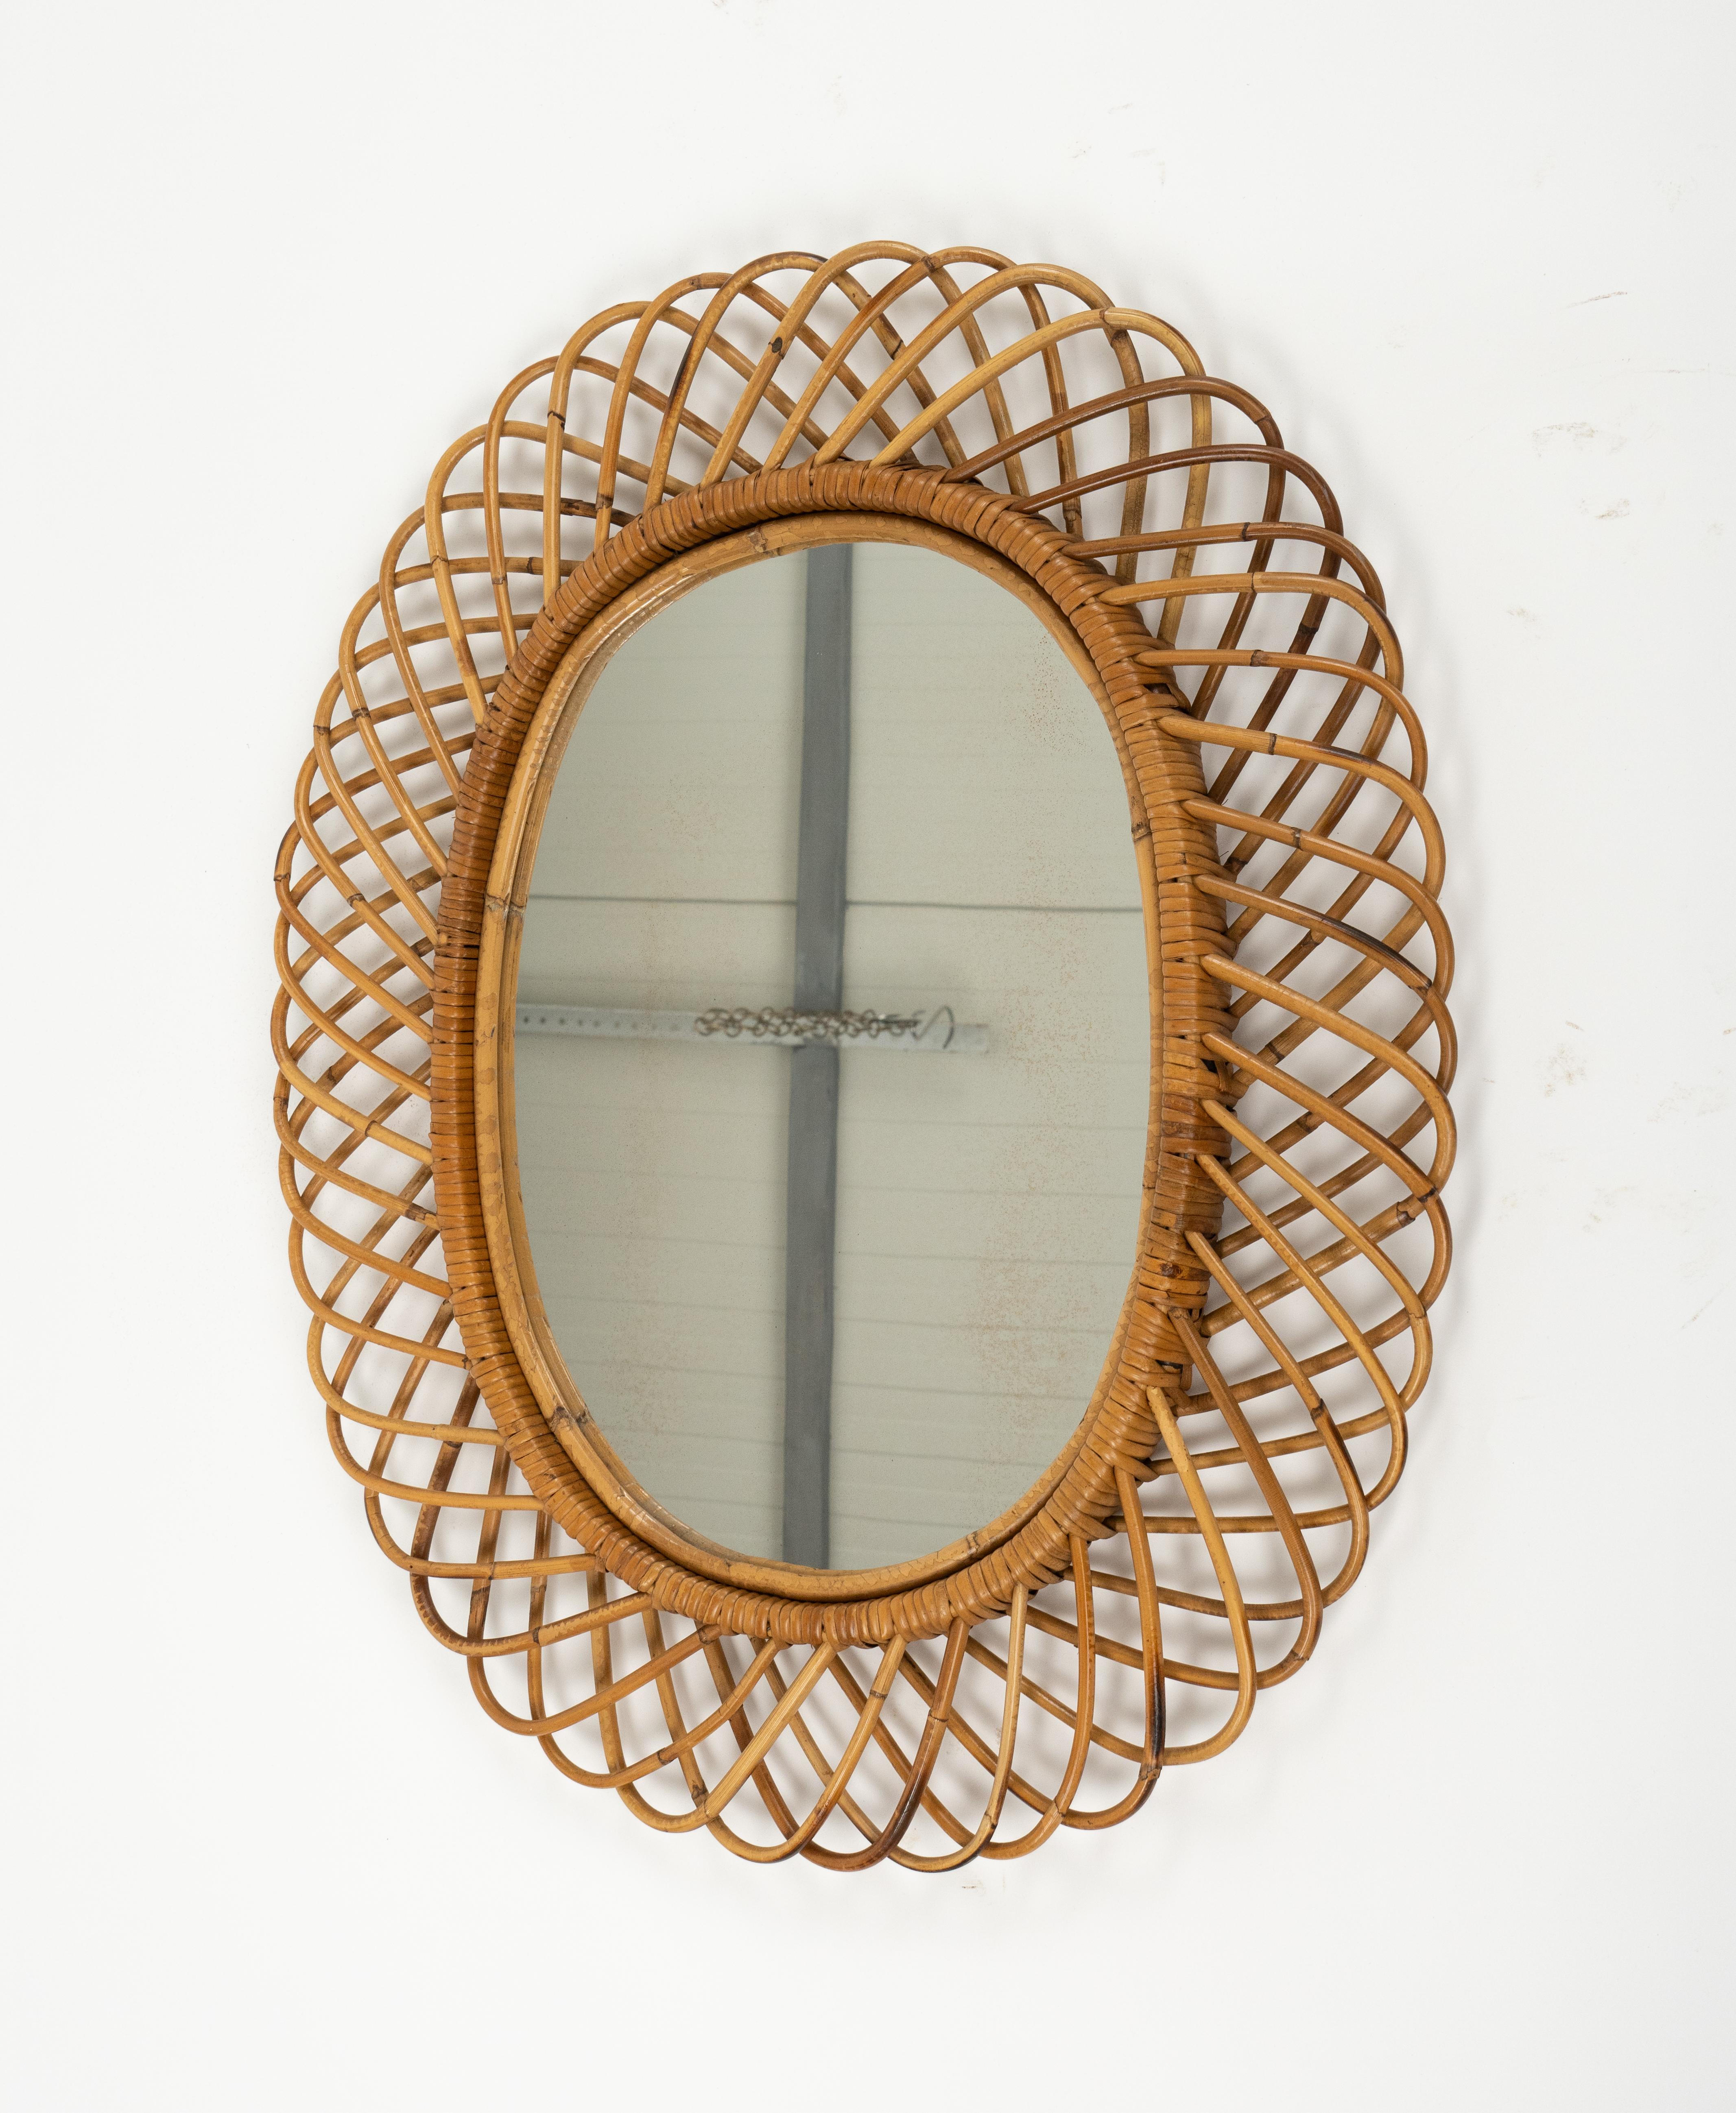 Midcentury Rattan and Bamboo Oval Wall Mirror by Franco Albini, Italy 1960s 6